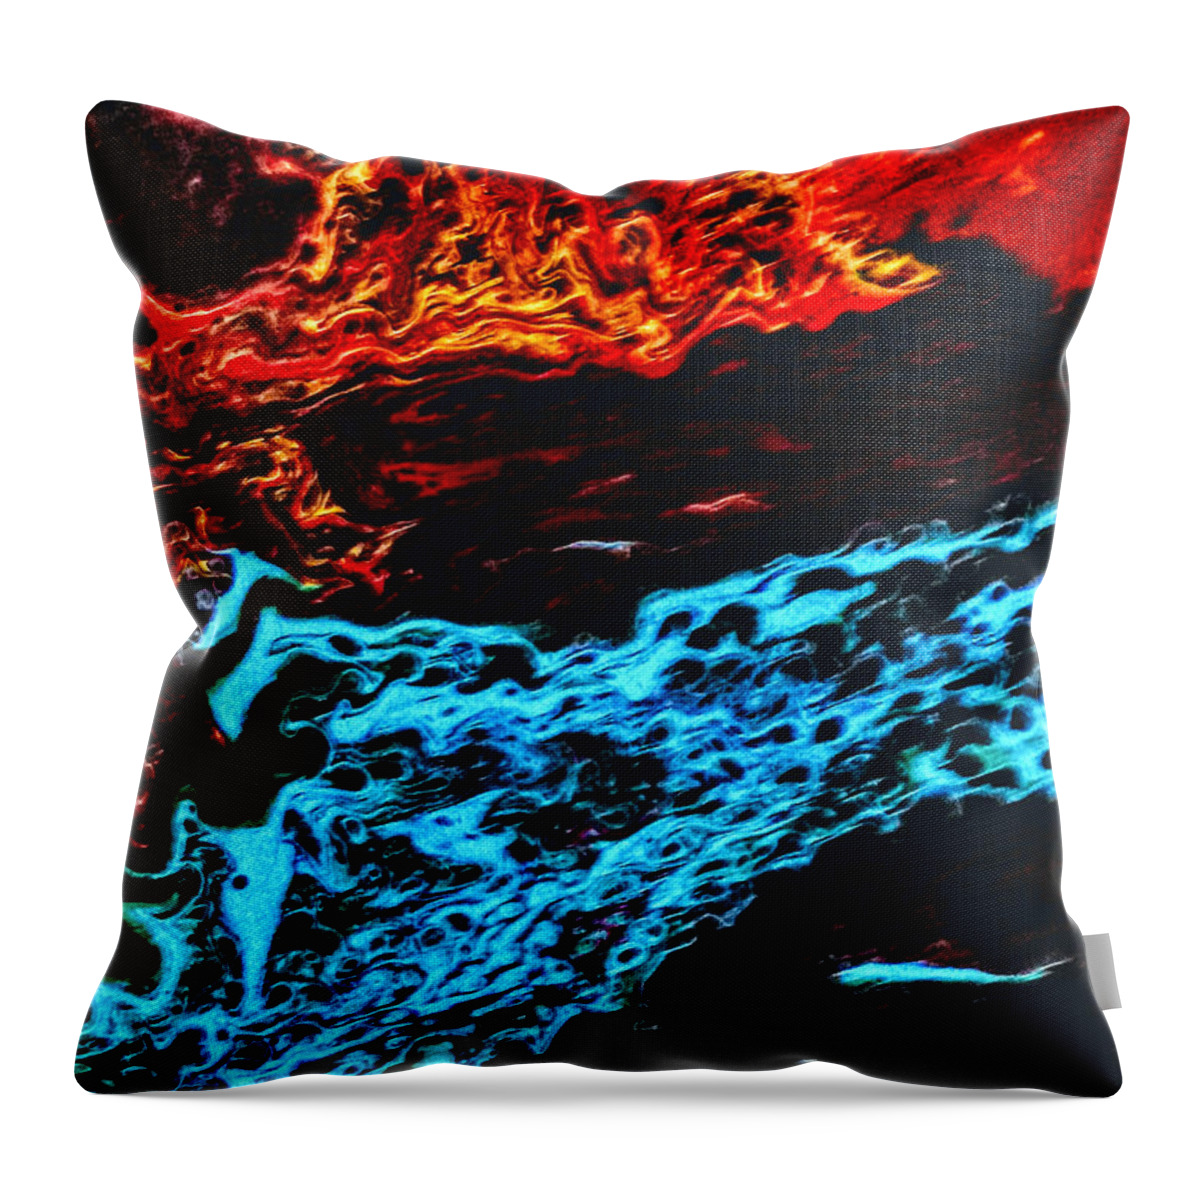 Fire Throw Pillow featuring the painting Fire And Ice by Anna Adams